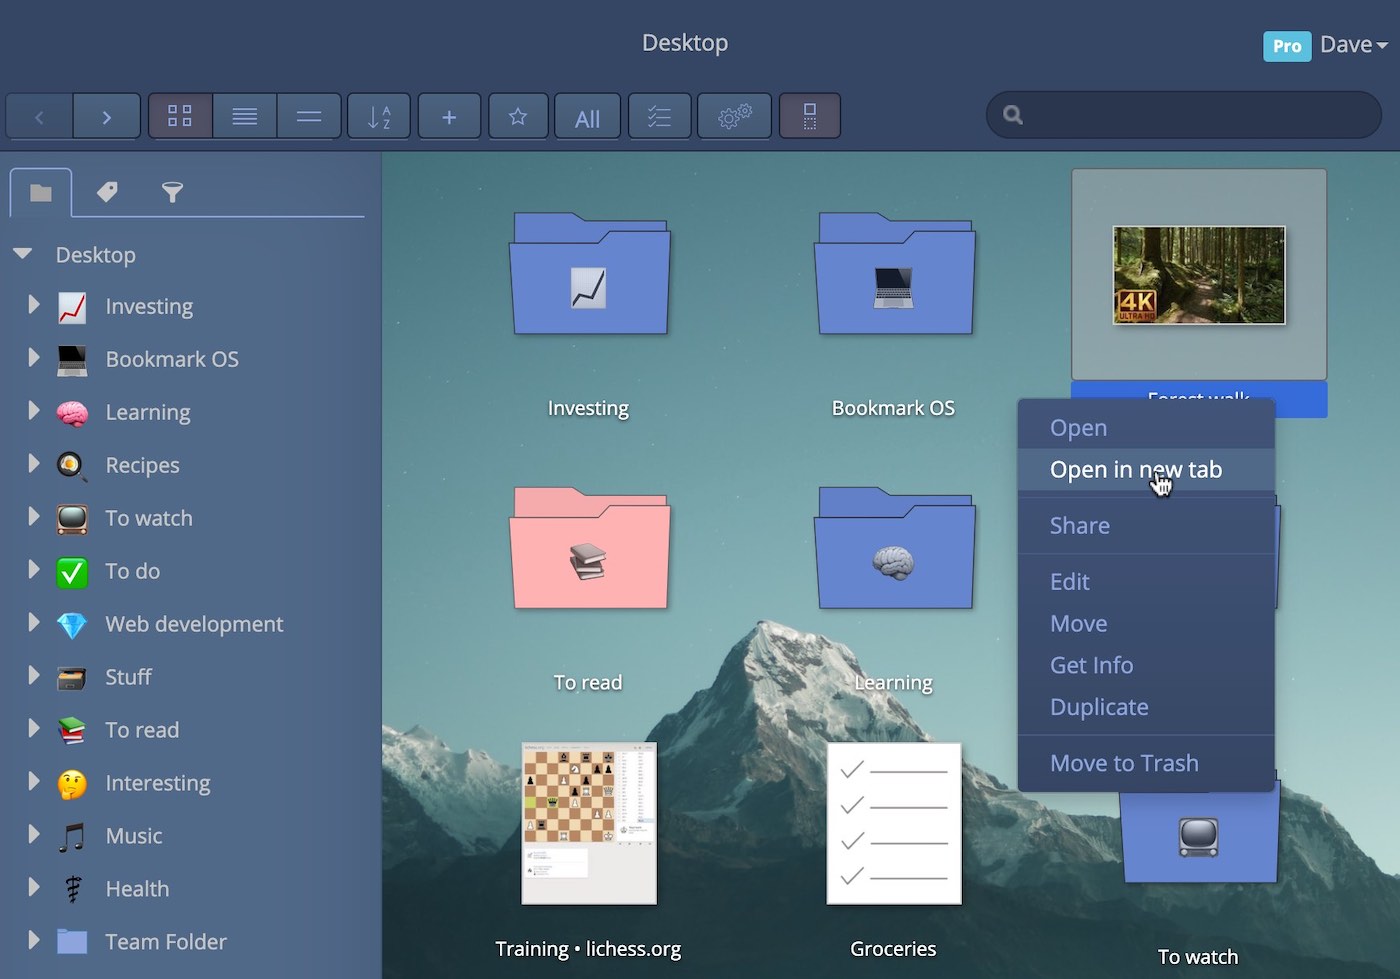 Introducing themes and folder colors